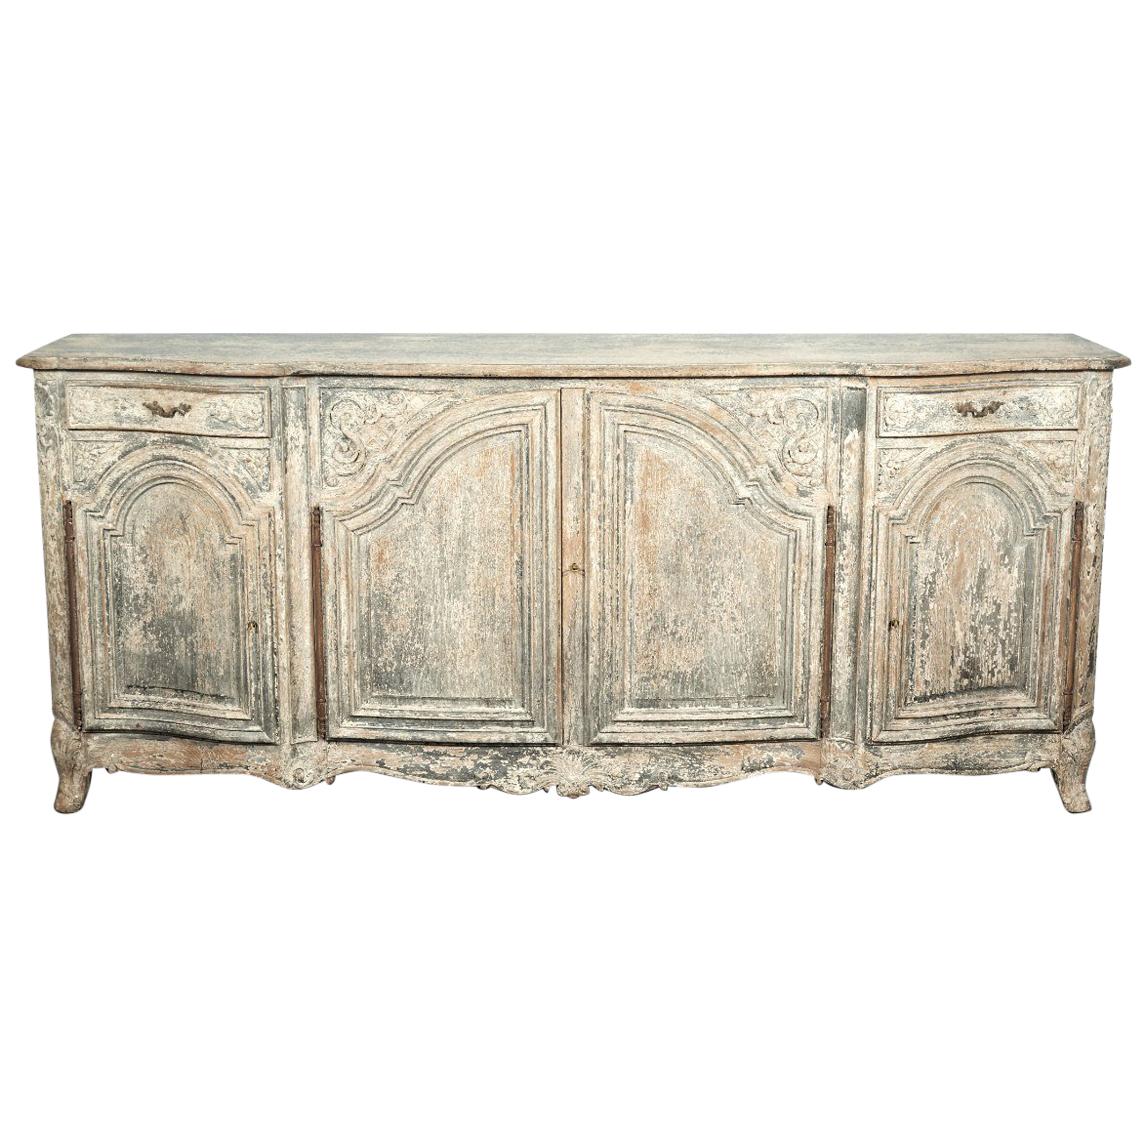 Louis XV Style Francisque Chaleyssin Painted Enfilade Buffet, Signed